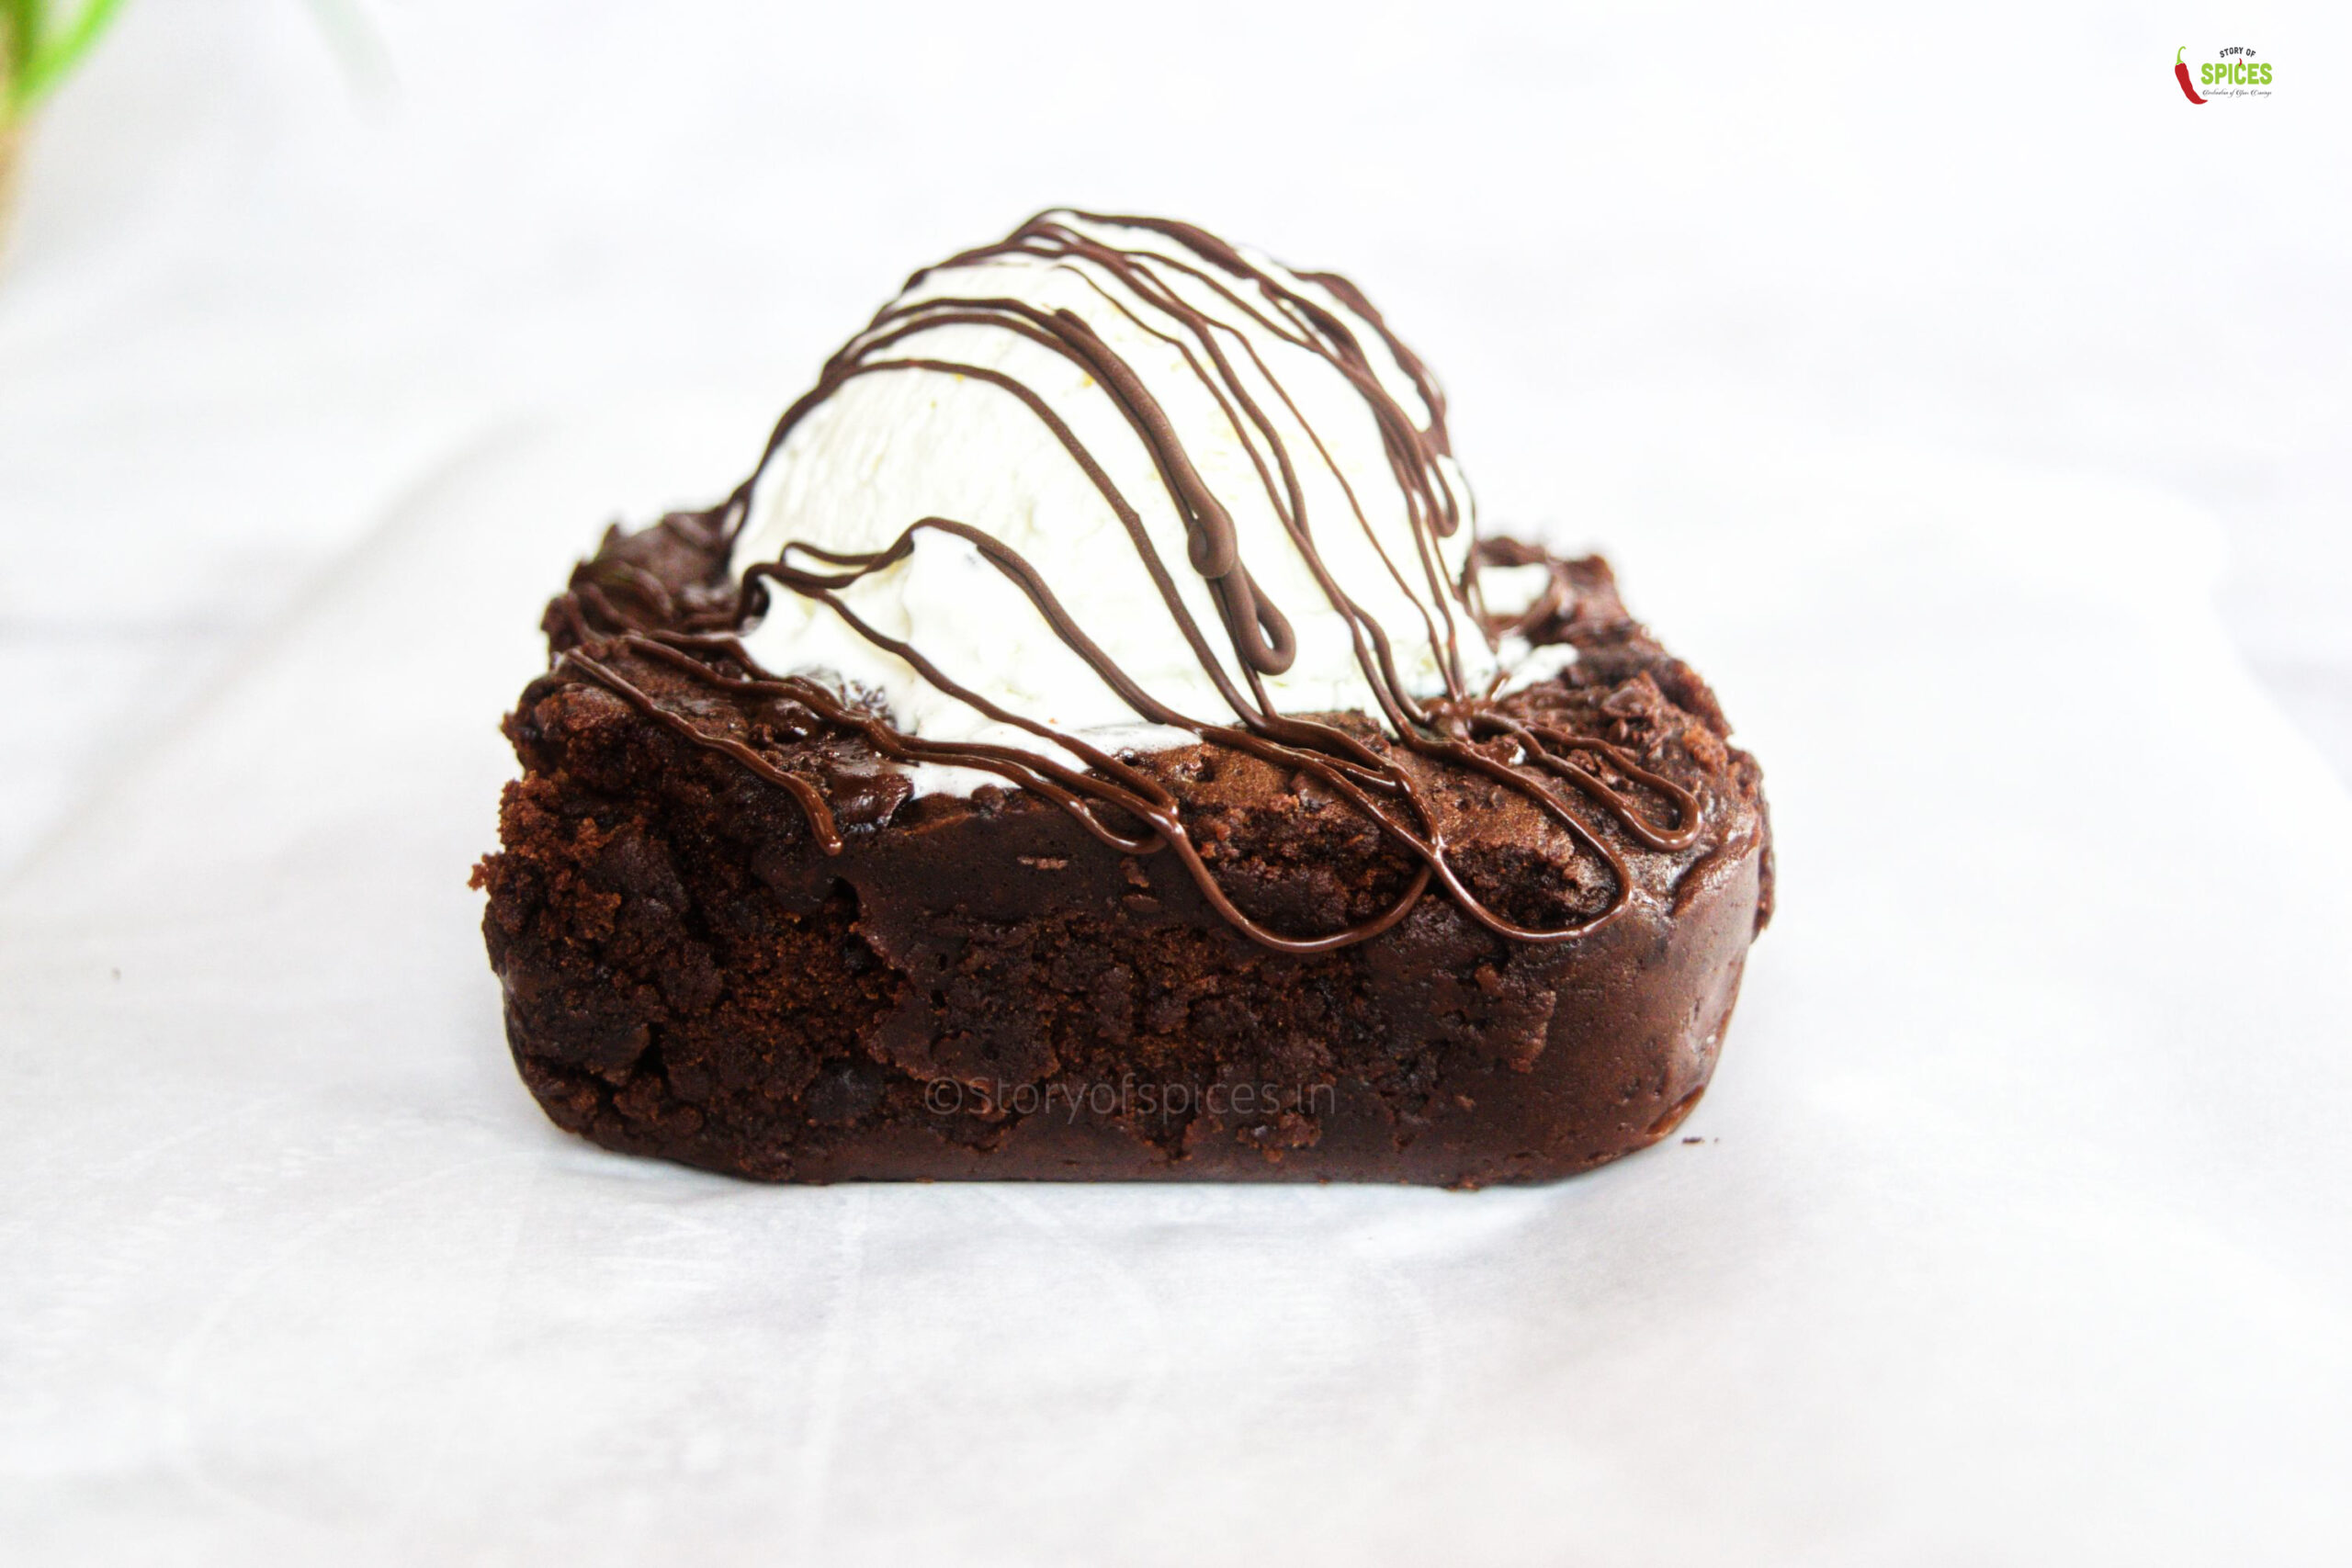 1 Minute Chocolate Brownie Recipe – This Last-Minute Chocolate Brownie Can Be Made Quickly For Valentine Celebrations